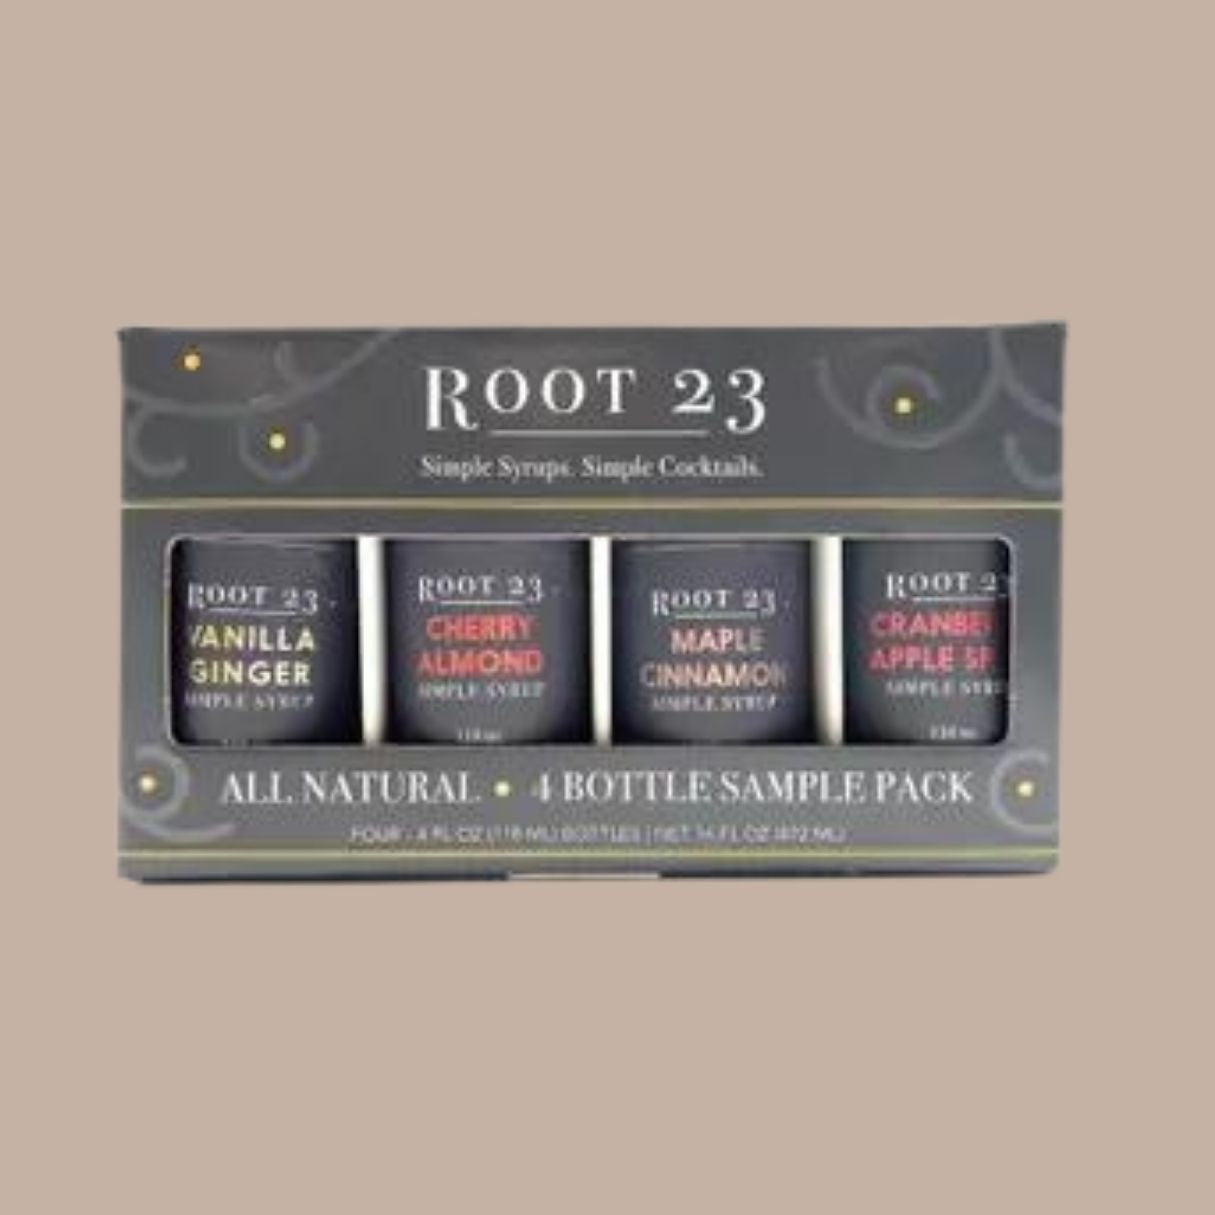 Set of 4 Mini Simple Syrups (Vanilla Ginger, Cherry Almond,Maple Cinnamon, Cranberry Apple Spice) - Root 23 - Box Builder Item - KINSHIP GIFT - celebration, Drinks/Cocktails, entertainment, gift set, housewarming, LDT:GW:RESTRICT, Men, Root 23, simple syrup - Pittsburgh - gift - boxes - gift - baskets - corporate - gifts - holiday - gifts